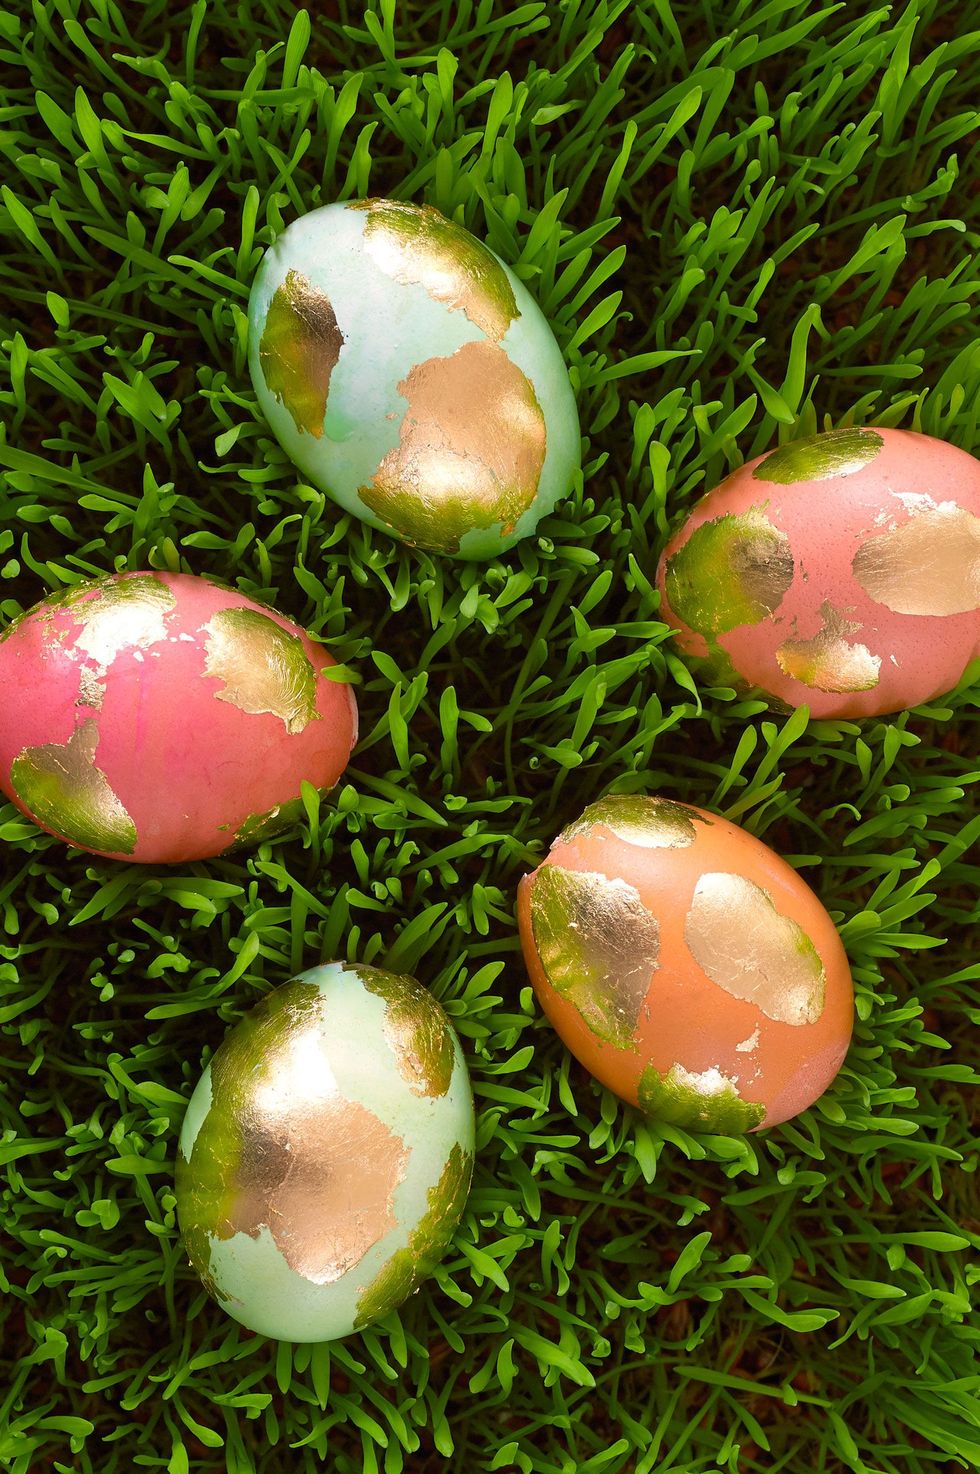 https://hips.hearstapps.com/hmg-prod/images/easy-easter-crafts-golden-eggs-1583270535.jpg?crop=0.794xw:0.796xh;0.0867xw,0.0341xh&resize=980:*